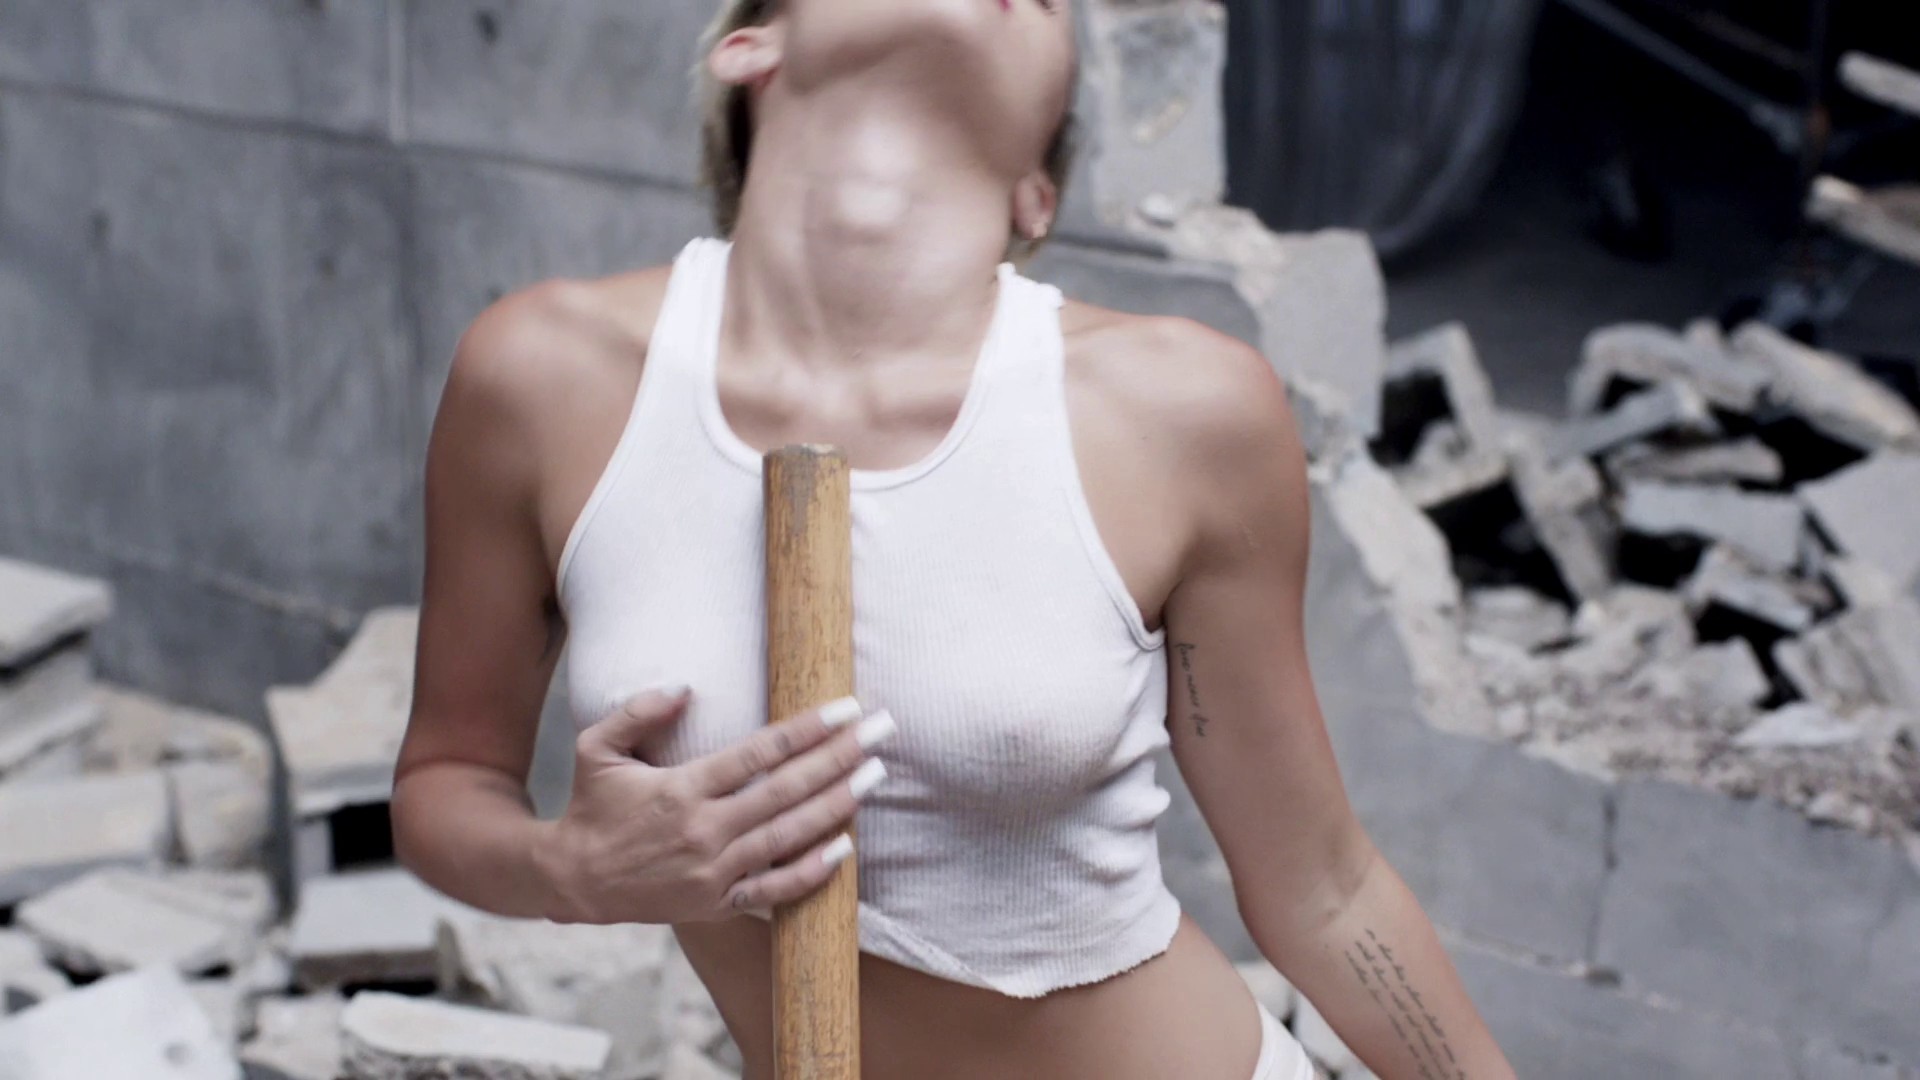 Miley Cyrus - Wrecking Ball explicit uncensored video 1080p2292.jpg